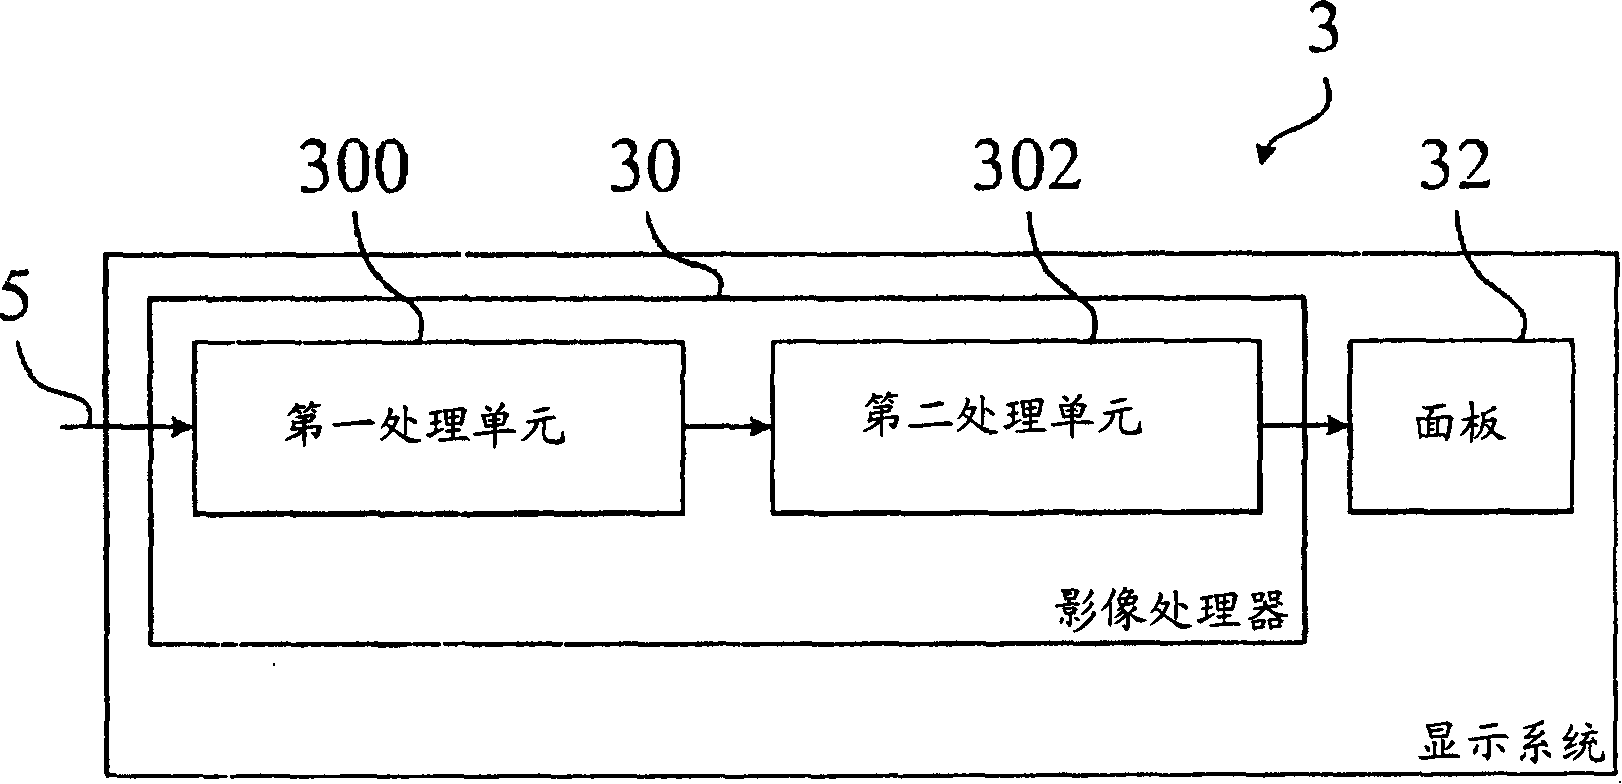 3D video display method and display system using this method